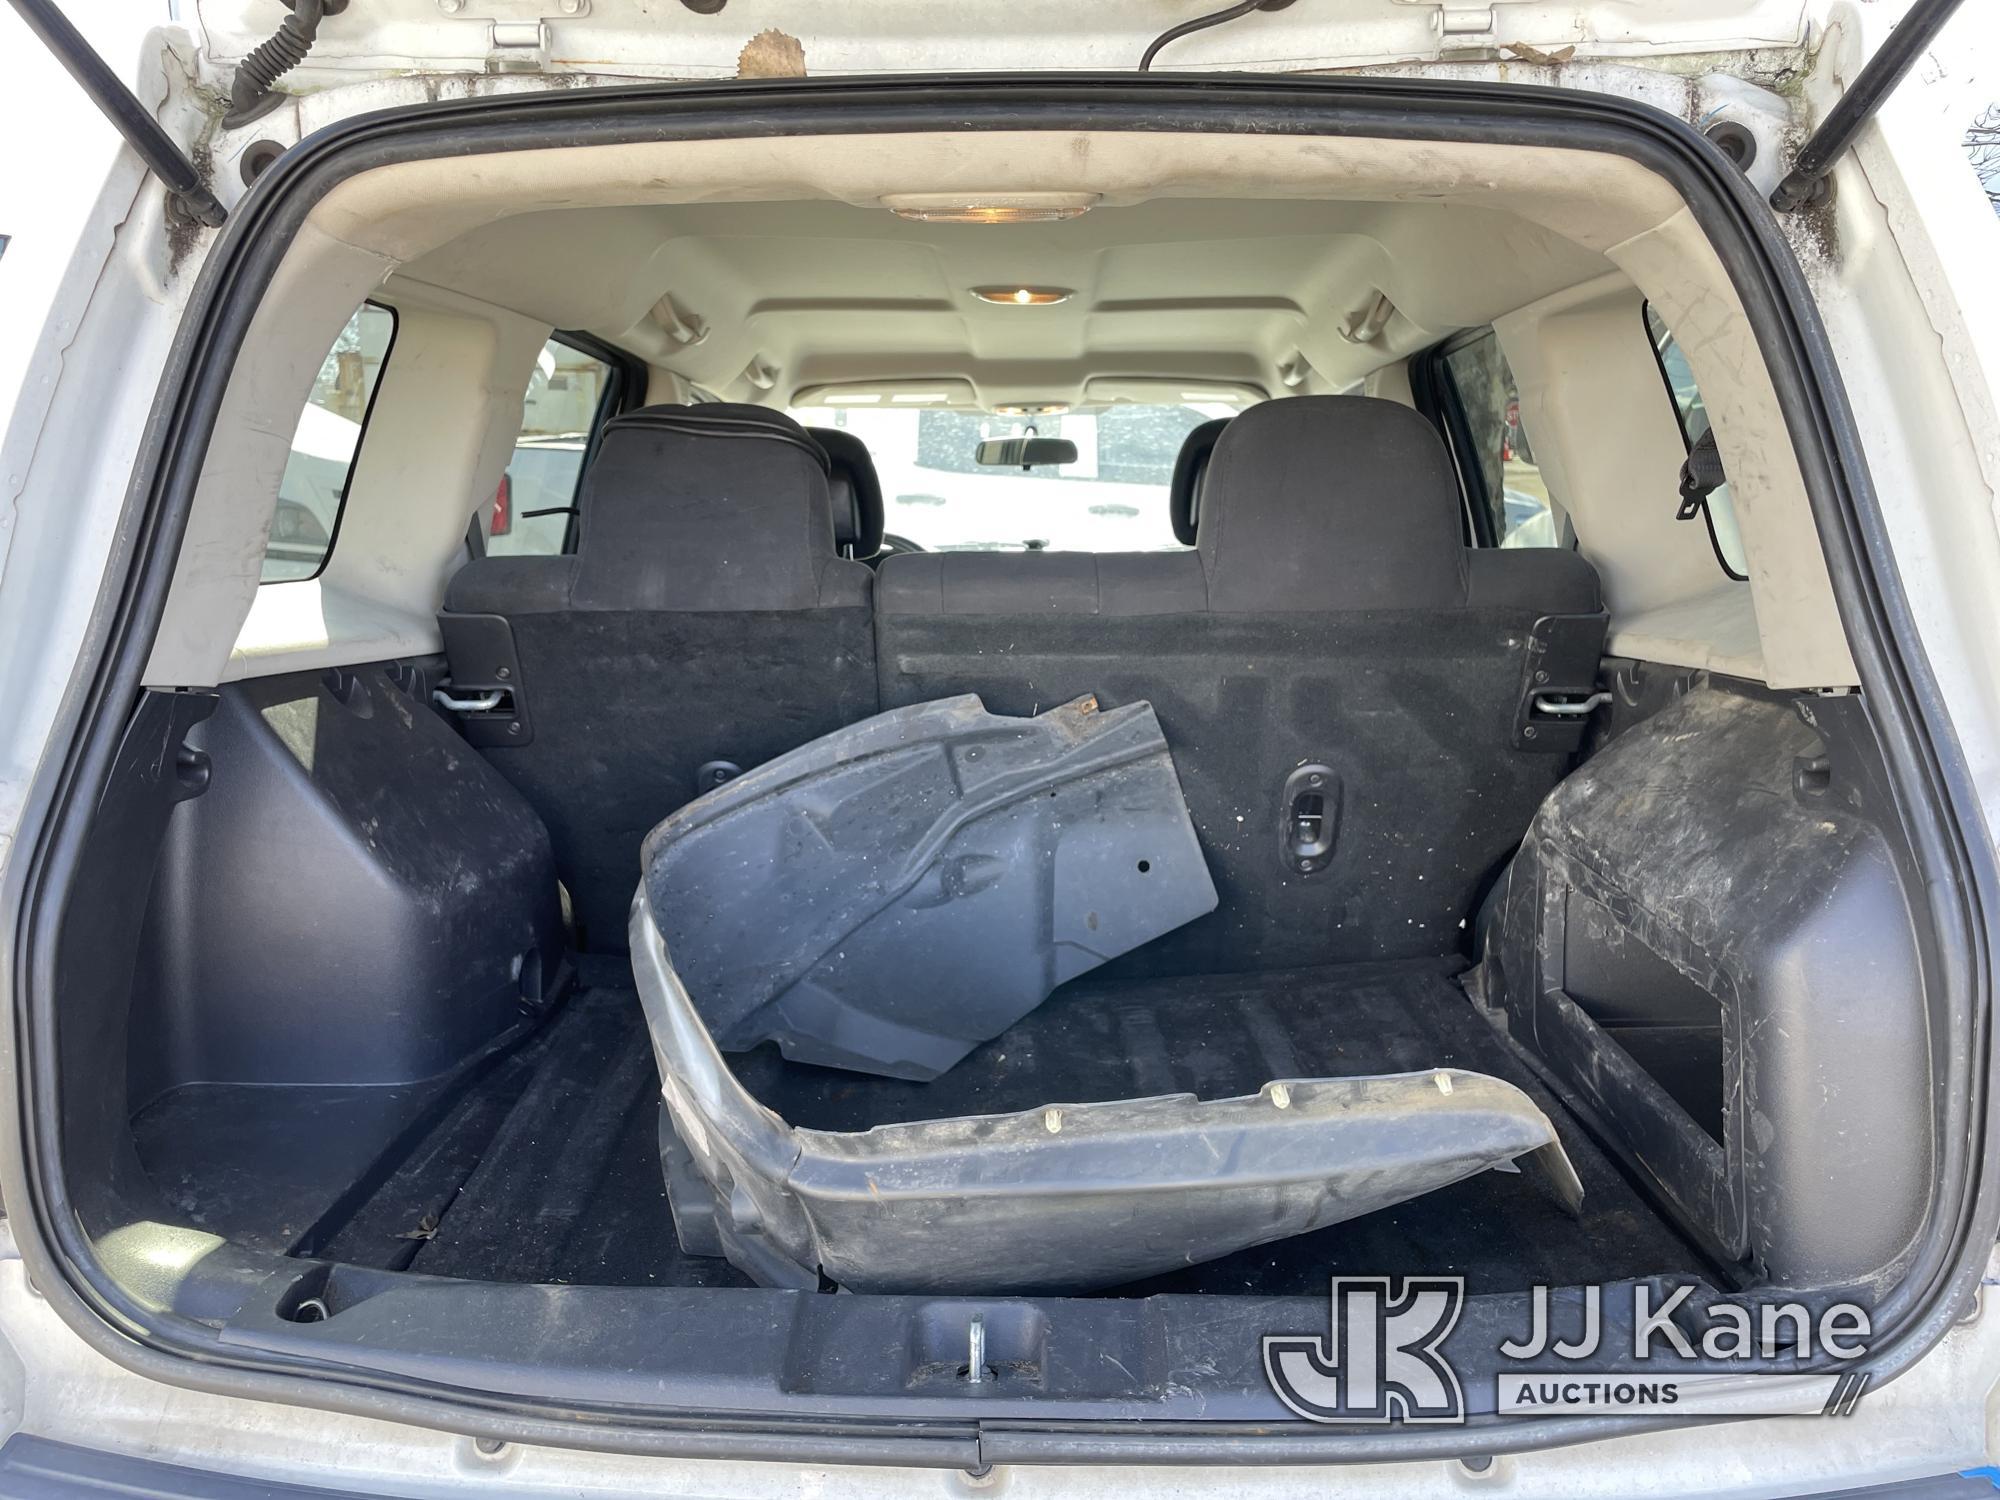 (Plymouth Meeting, PA) 2014 Jeep Patriot 4x4 4-Door Sport Utility Vehicle Not Running, Condition Unk